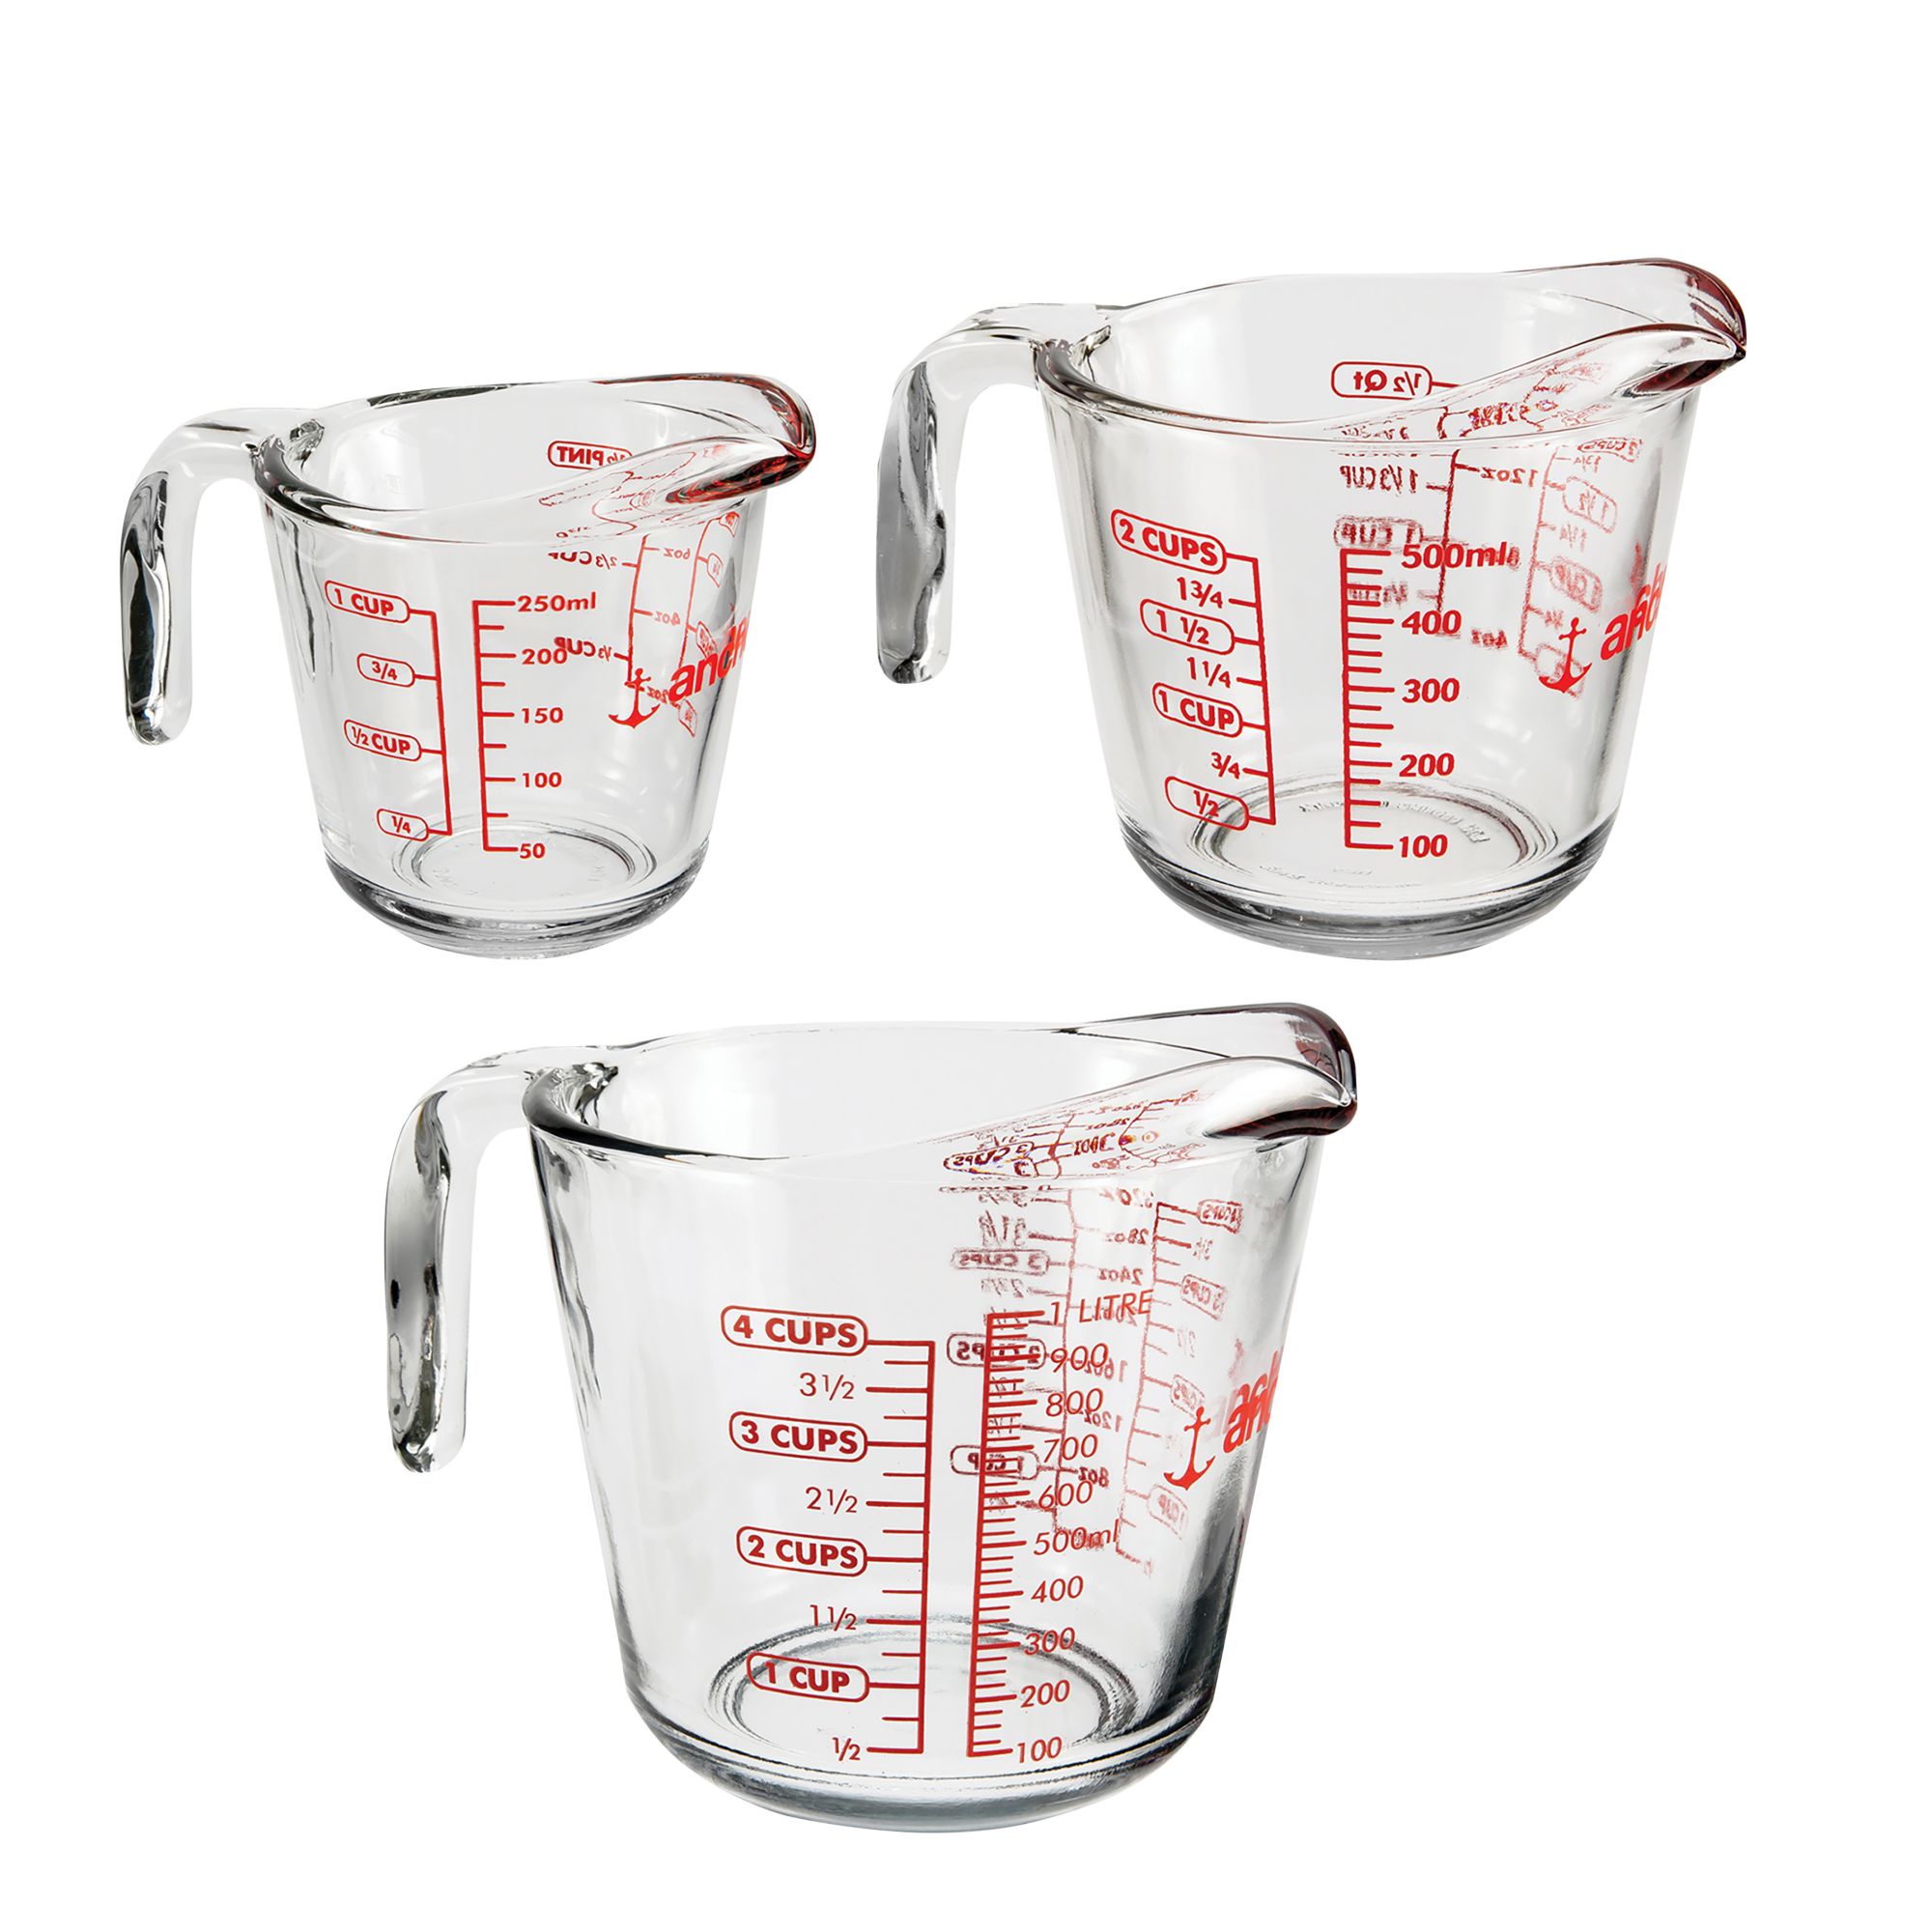 Save on Pyrex Liquid Measuring Cup - 4 cup Order Online Delivery